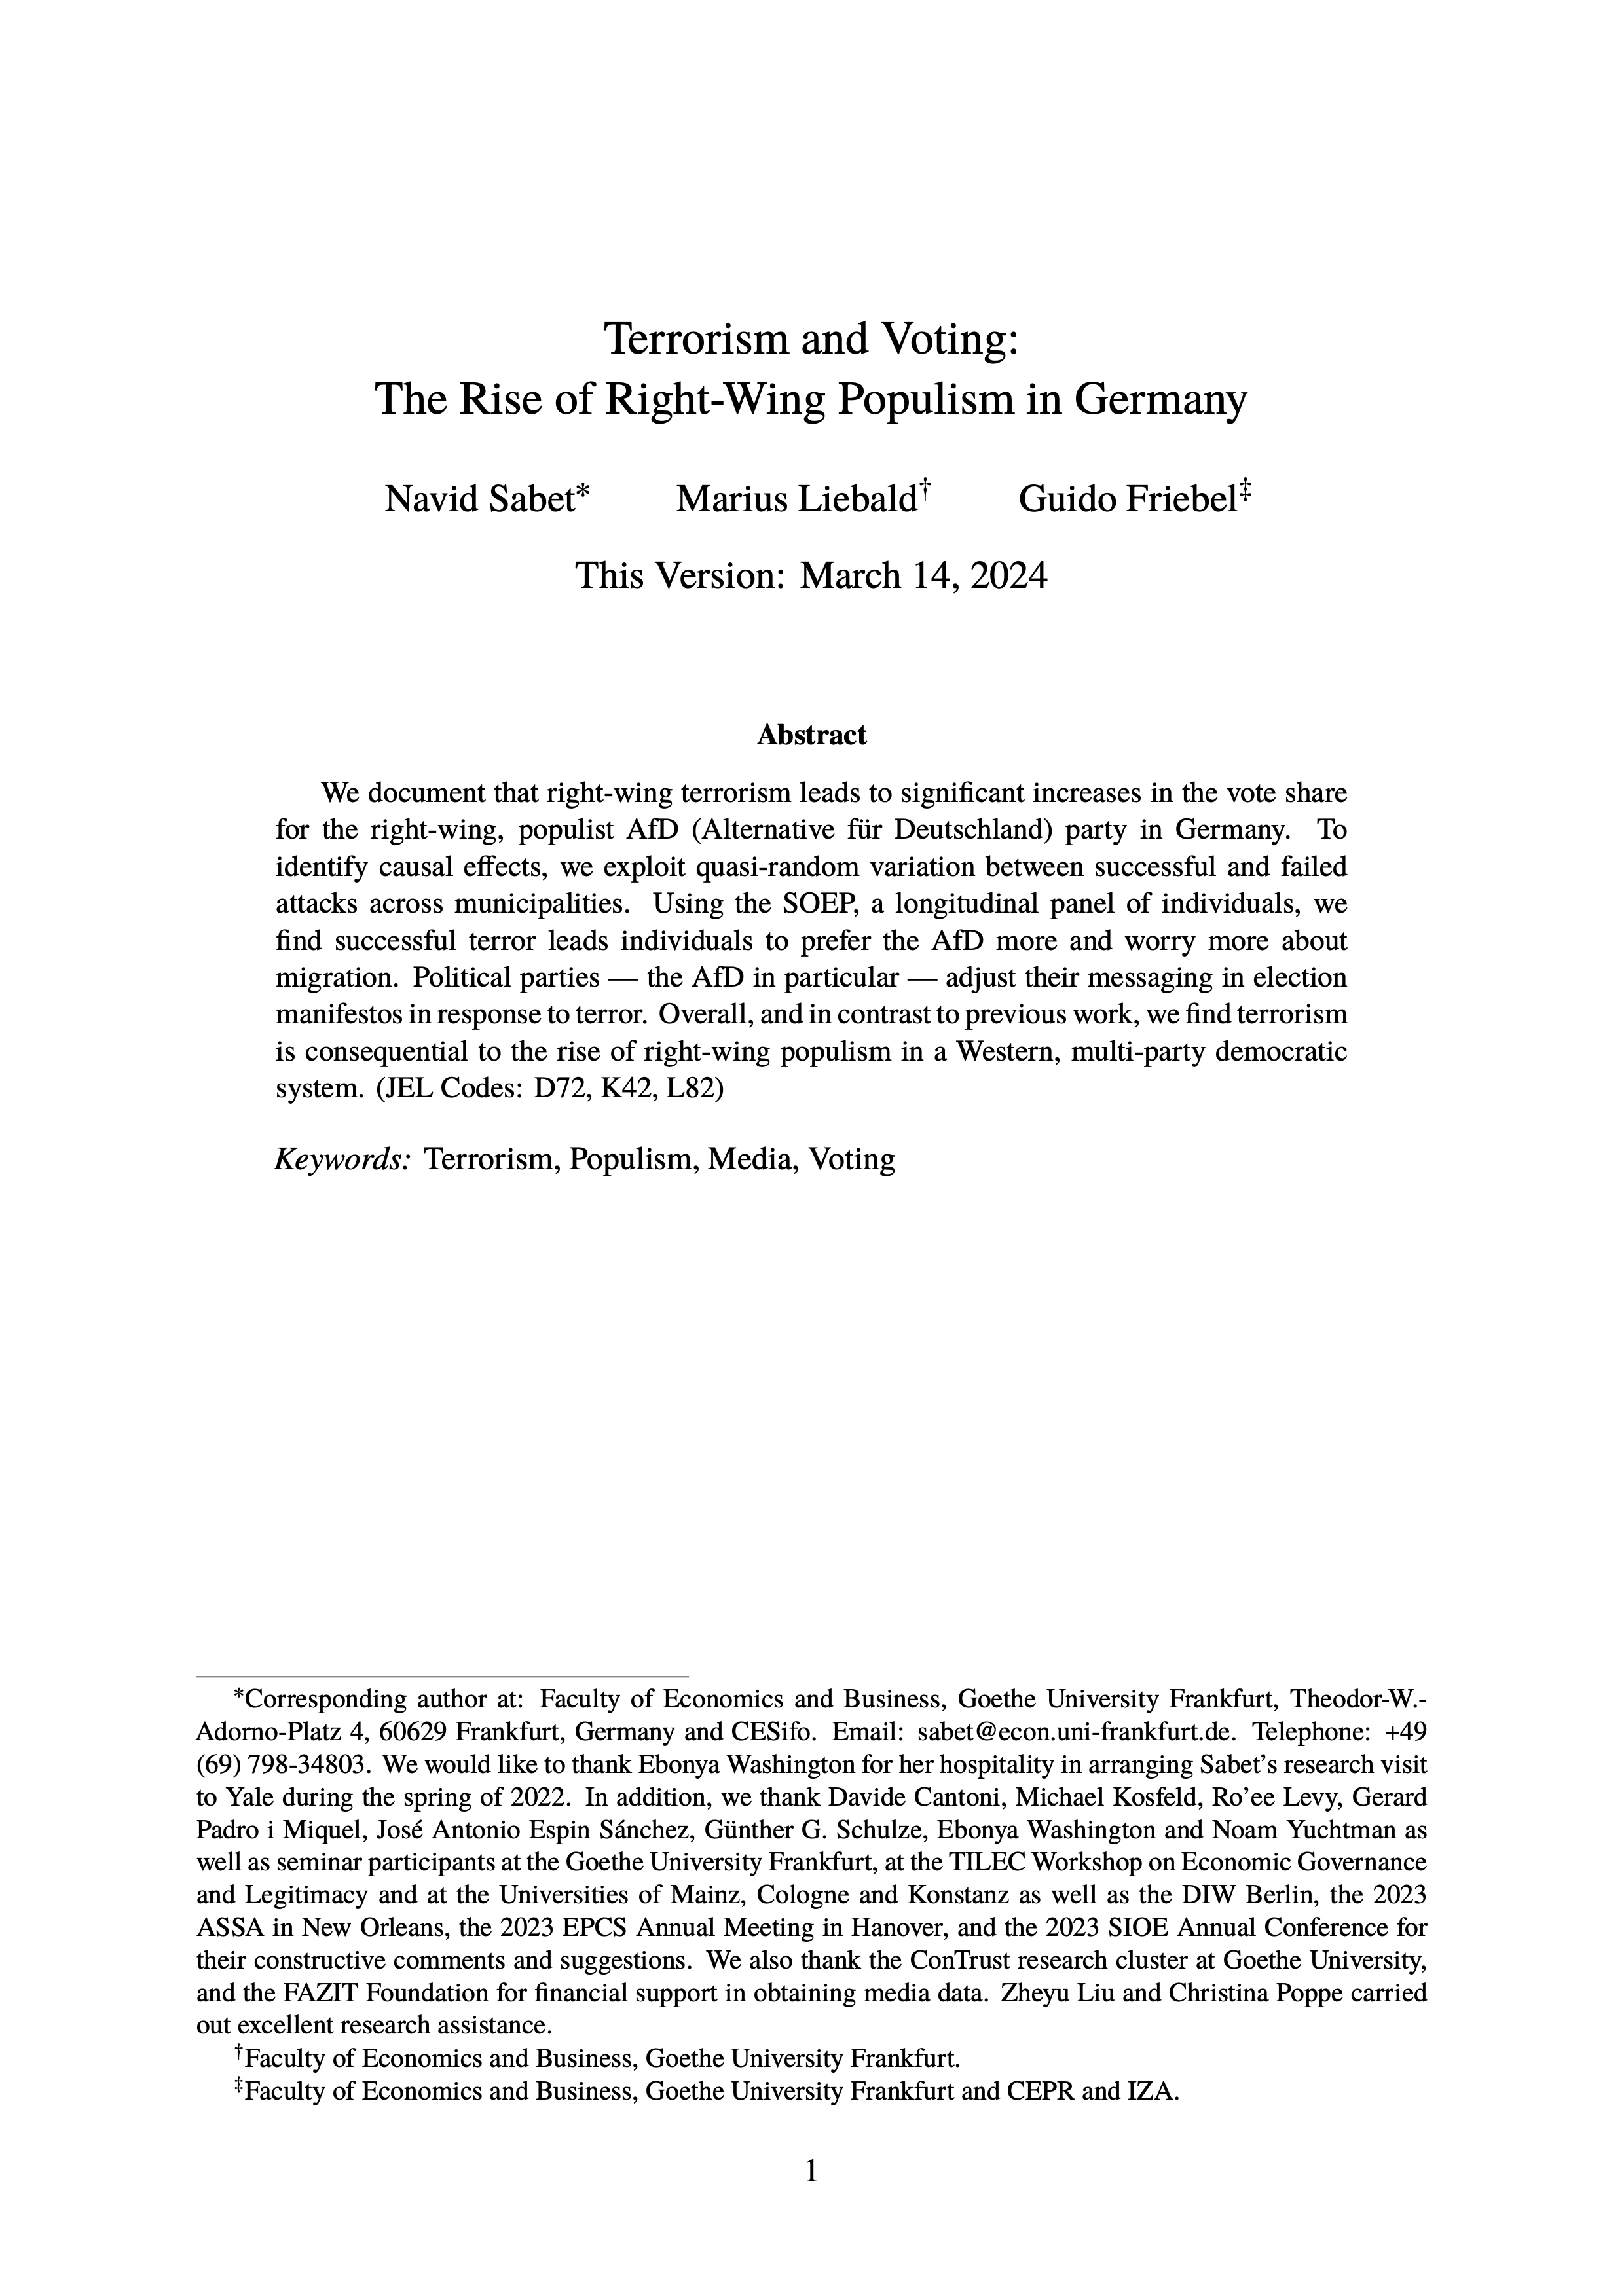 Paper: Terrorism and Voting: The Rise of Right-Wing Populism in Germany